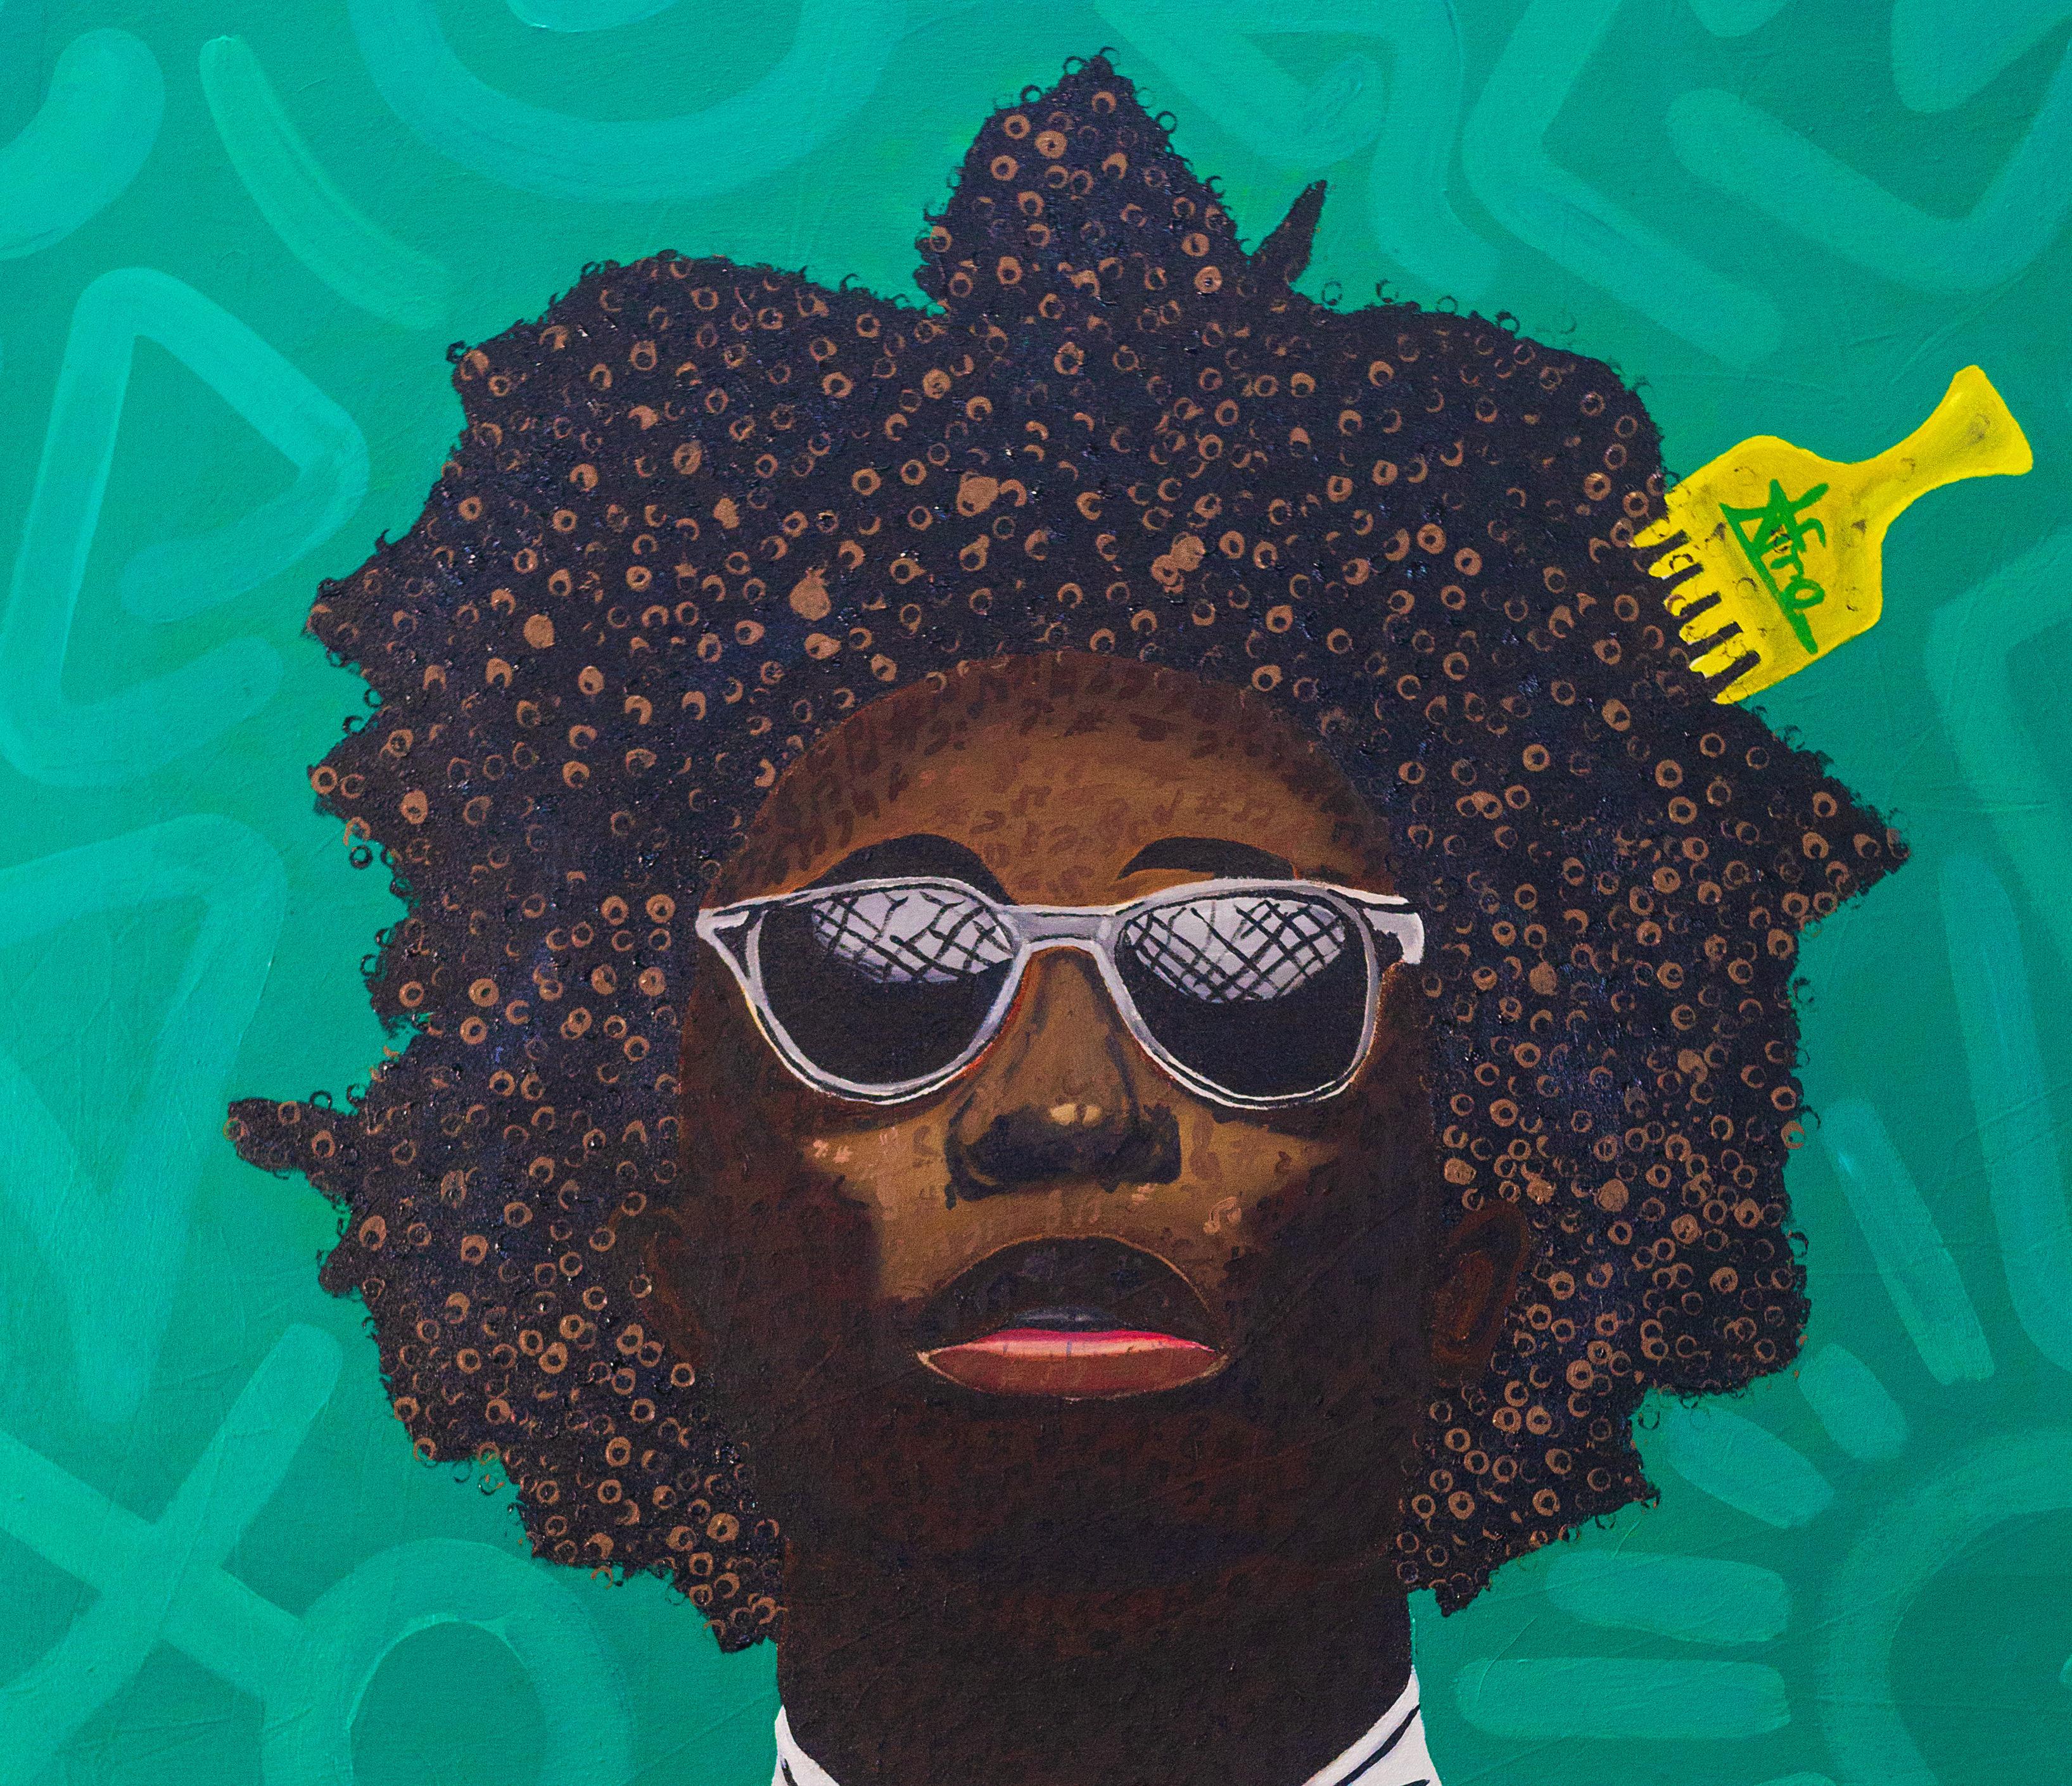 The Boy from The Hood - Contemporary Painting by Oladire Araireoluwa